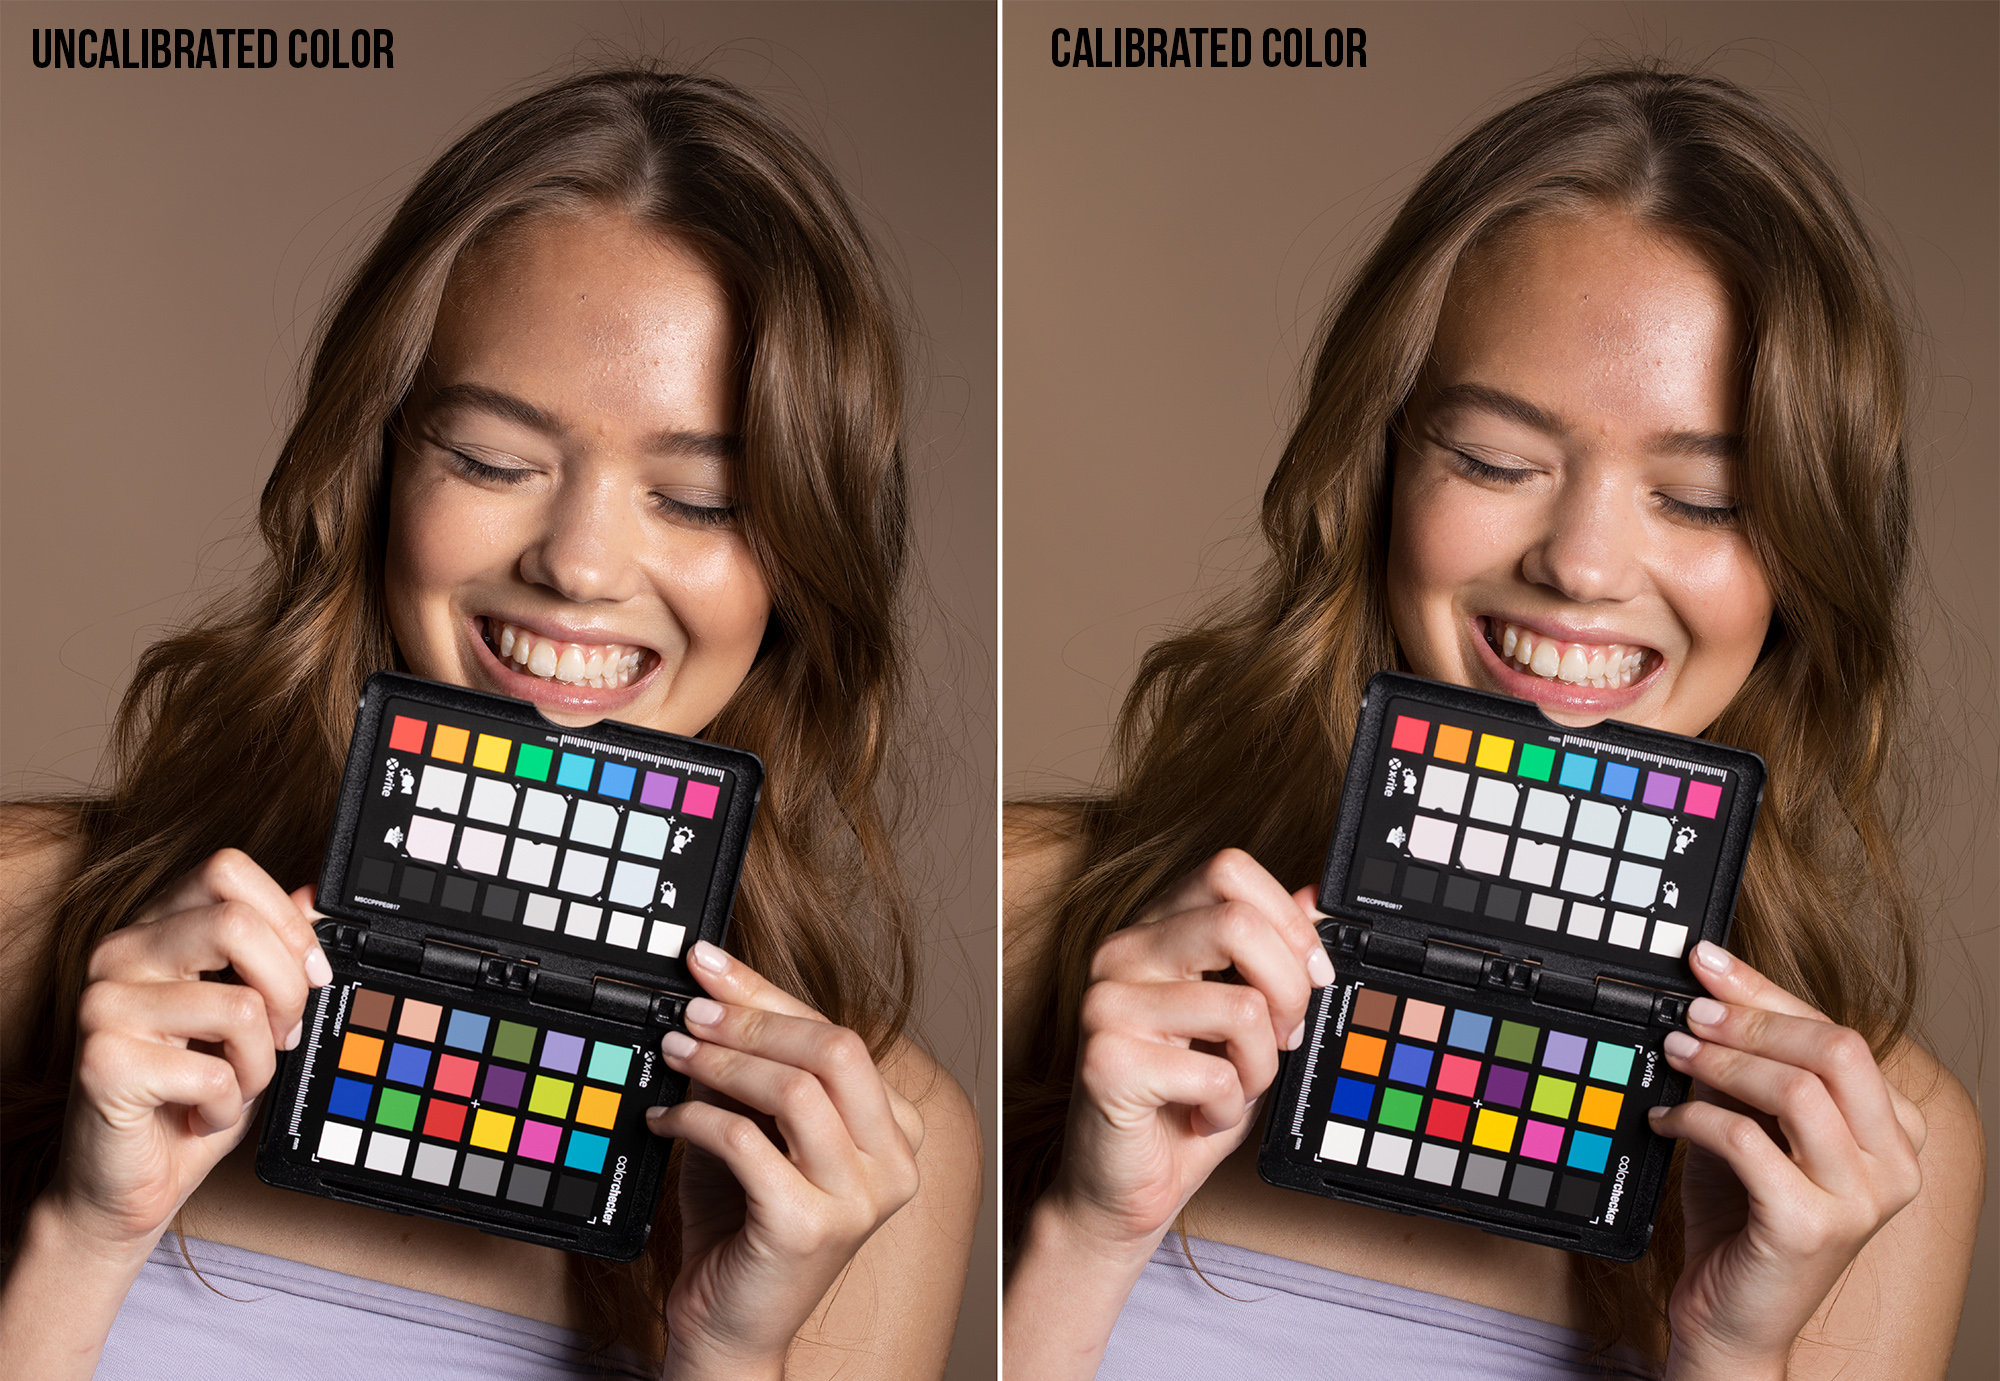 What is Color Checker?